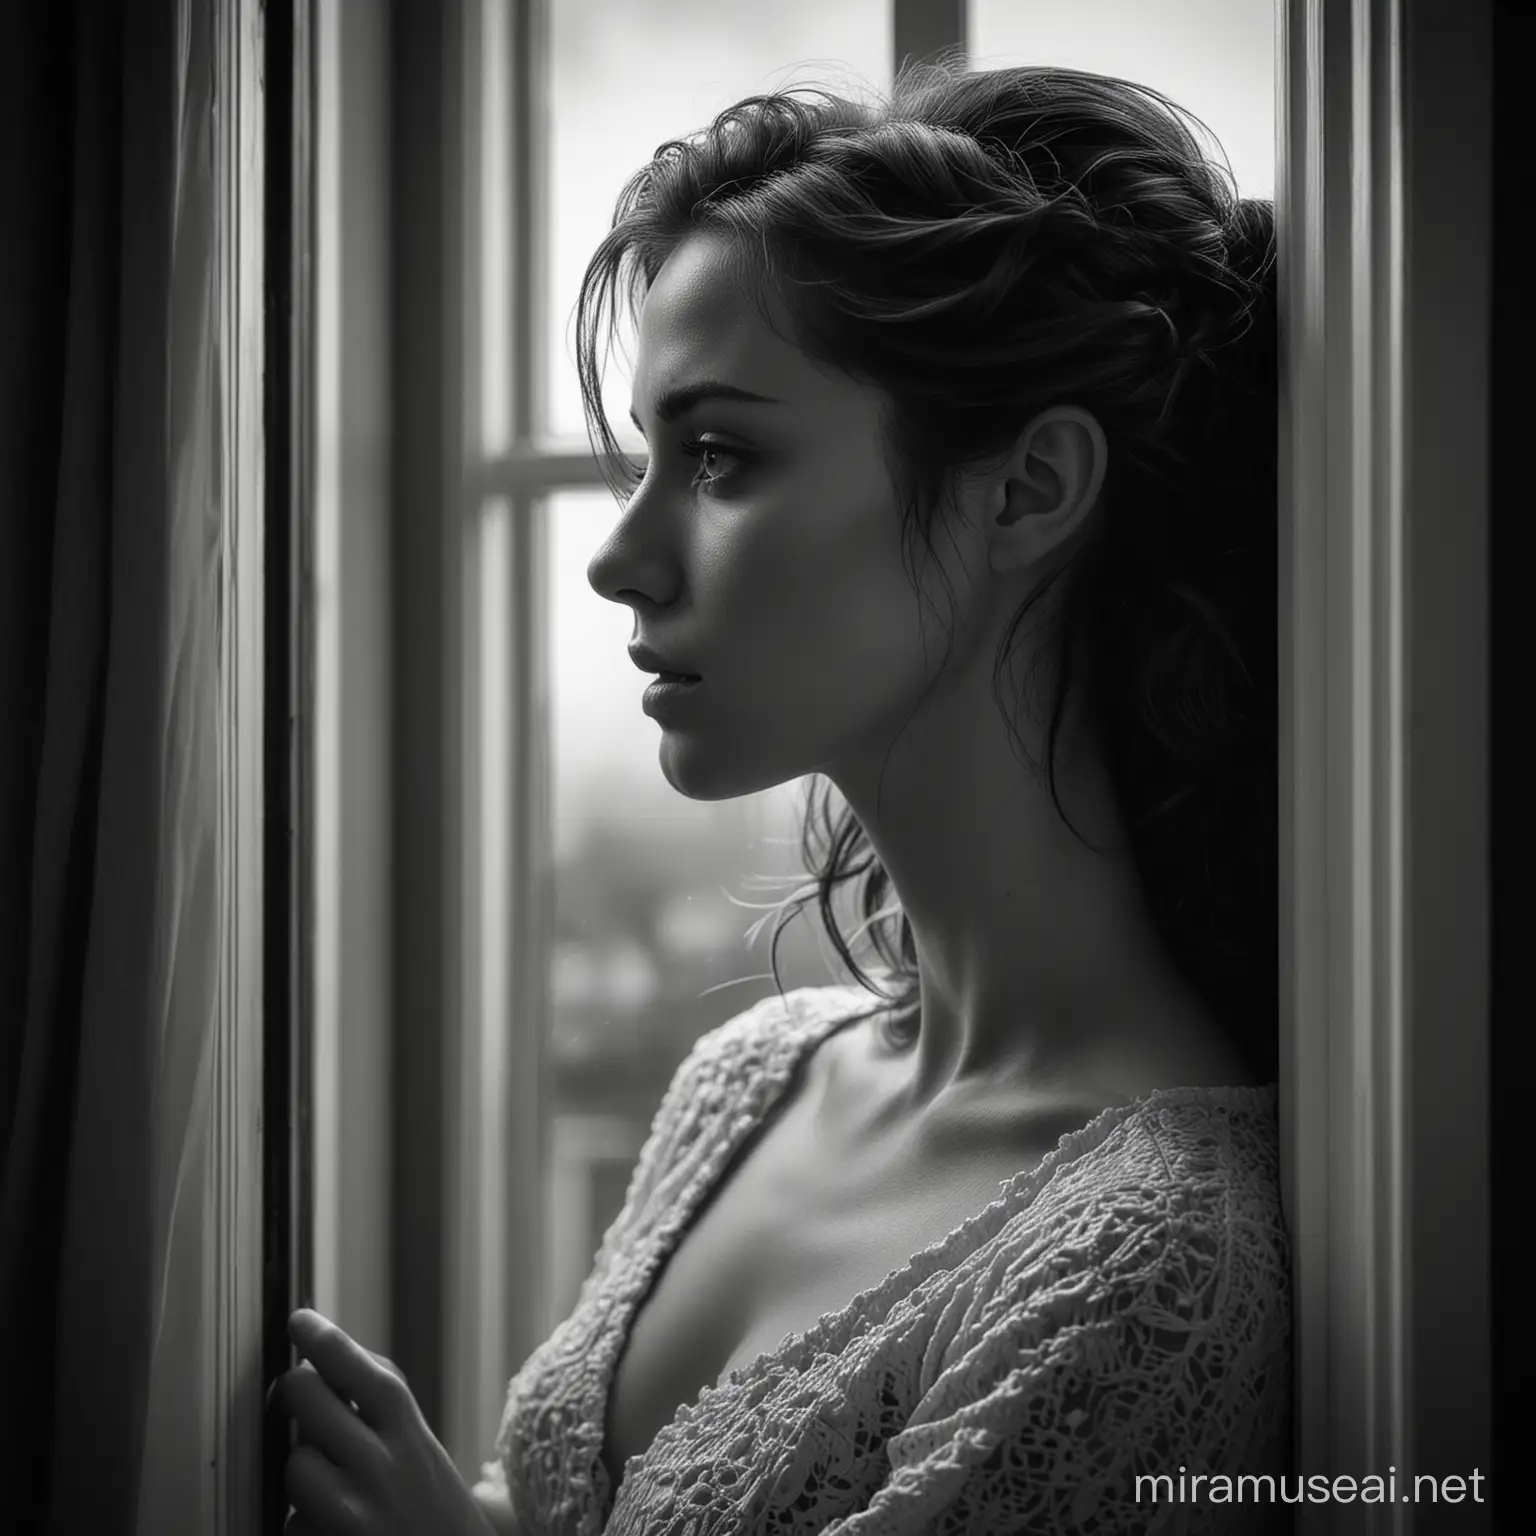 Dramatic Black and White Portrait Woman Gazing Anxiously Out Window